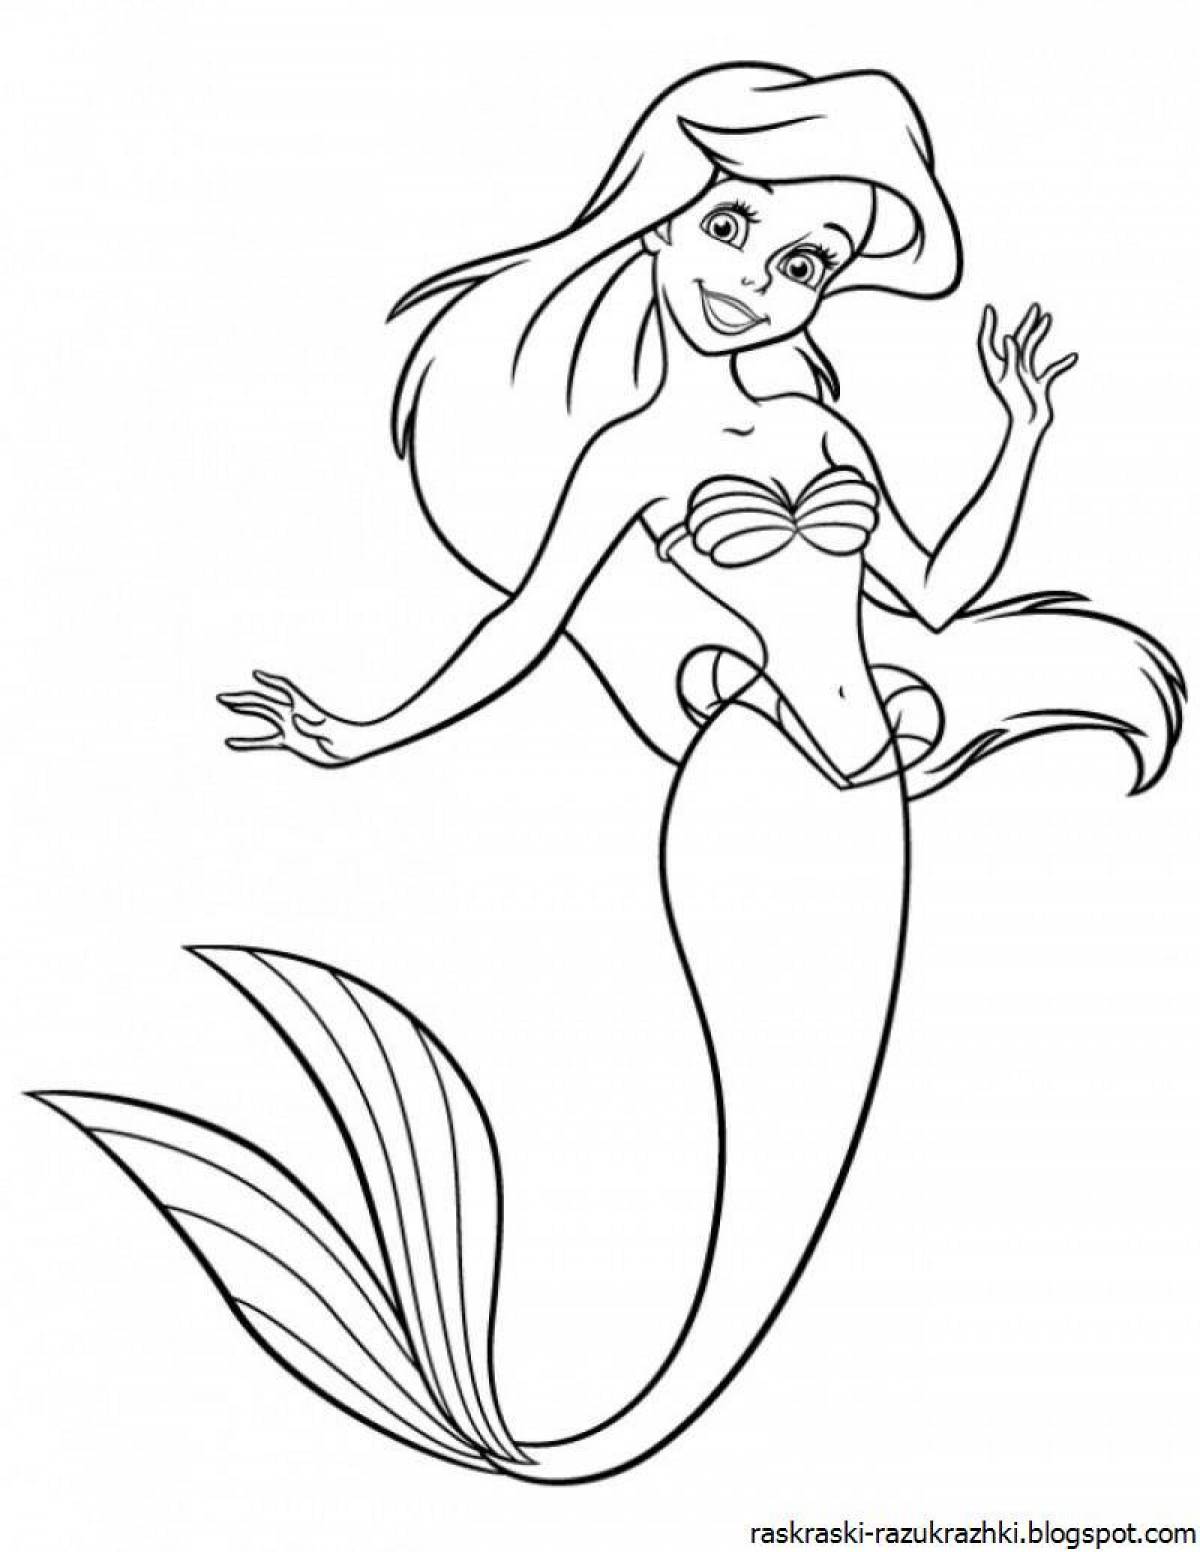 Colourful mermaid coloring book for kids